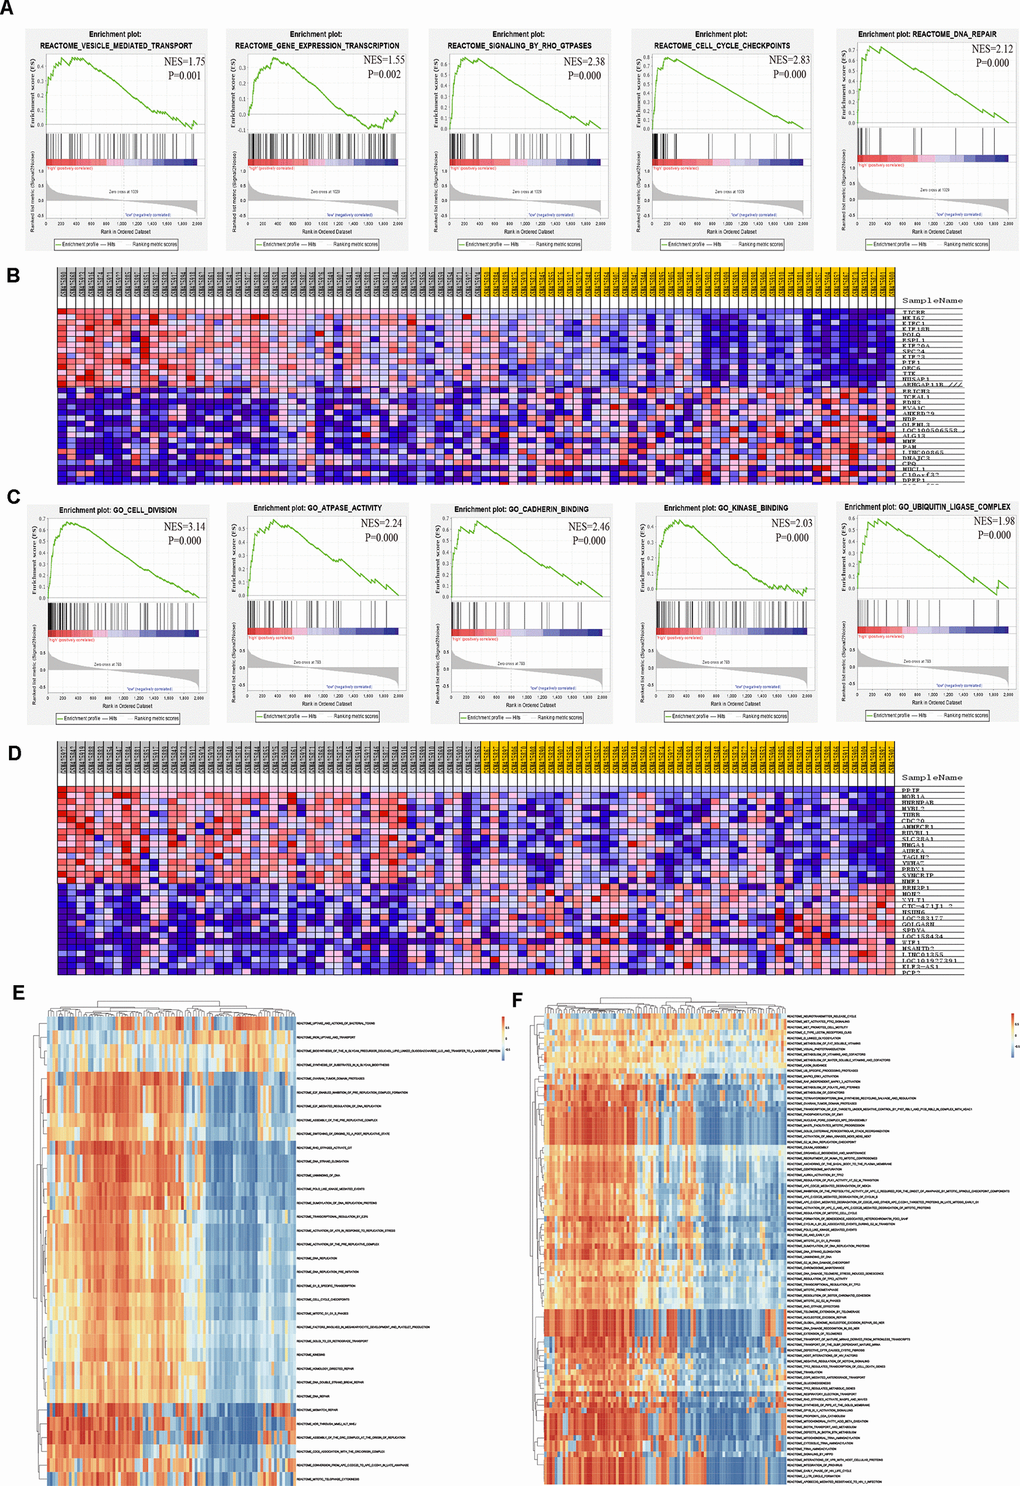 Aging Overexpression Of Ticrr And Ppif Confer Poor Prognosis In Endometrial Cancer Identified By Gene Co Expression Network Analysis Full Text